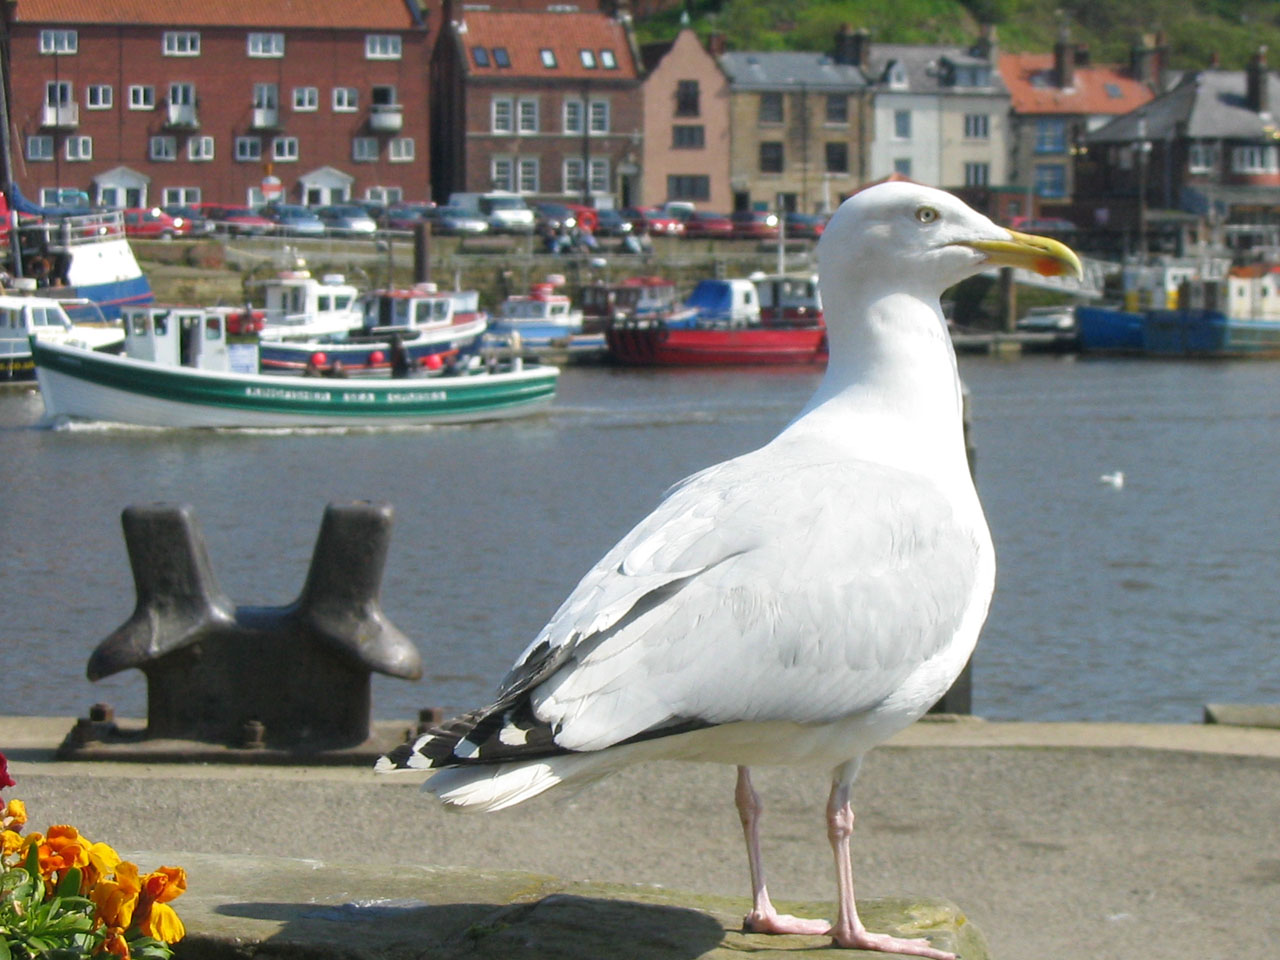 A seagull in Whitby